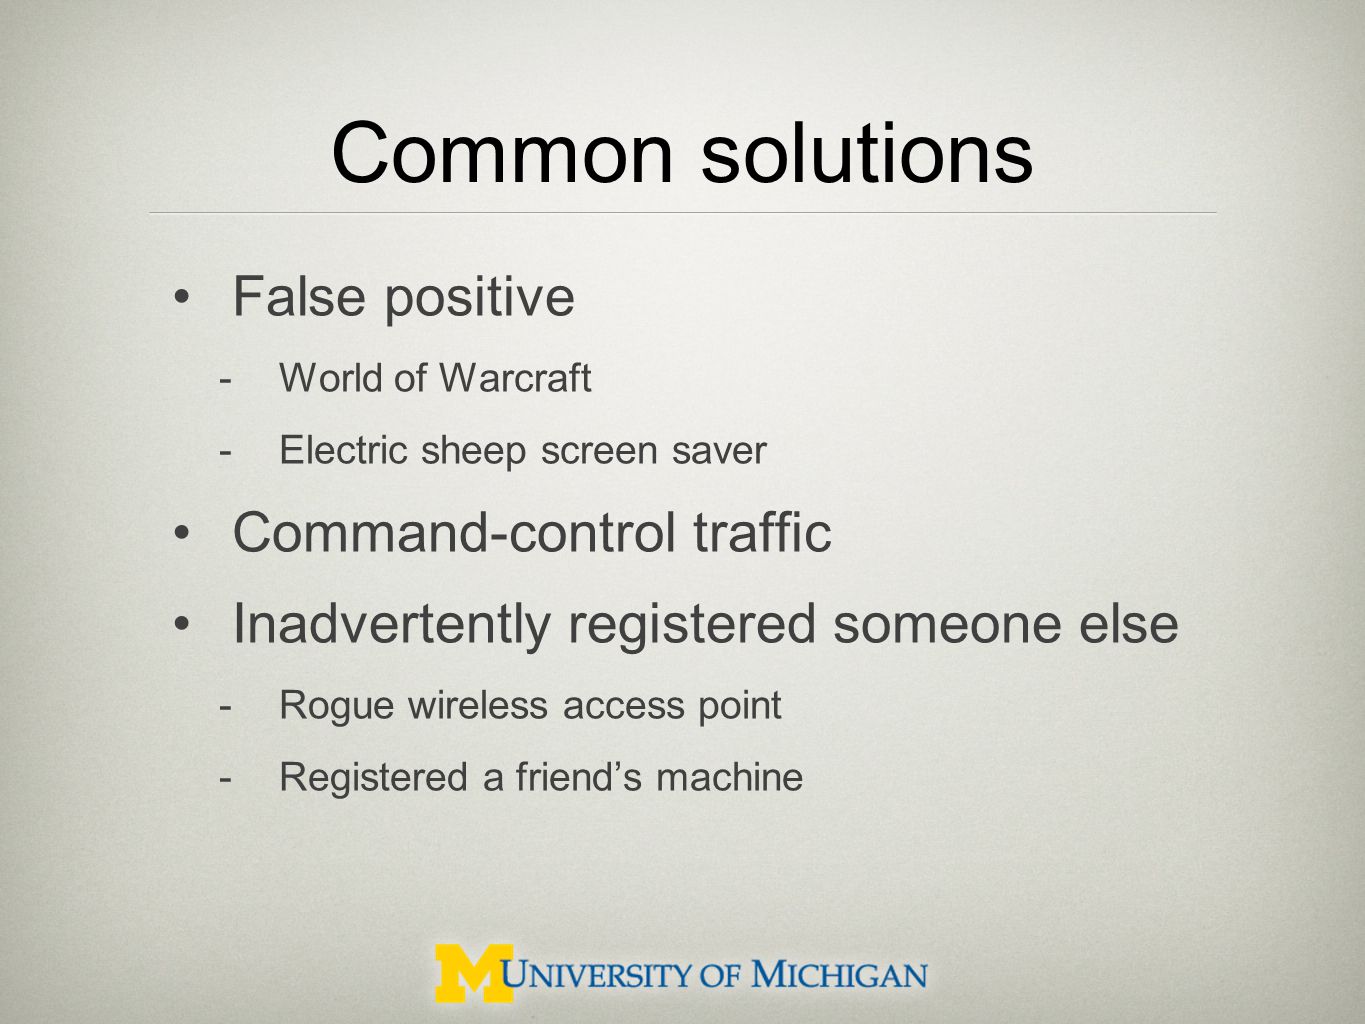 Common solutions False positive -World of Warcraft -Electric sheep screen saver Command-control traffic Inadvertently registered someone else -Rogue wireless access point -Registered a friend’s machine